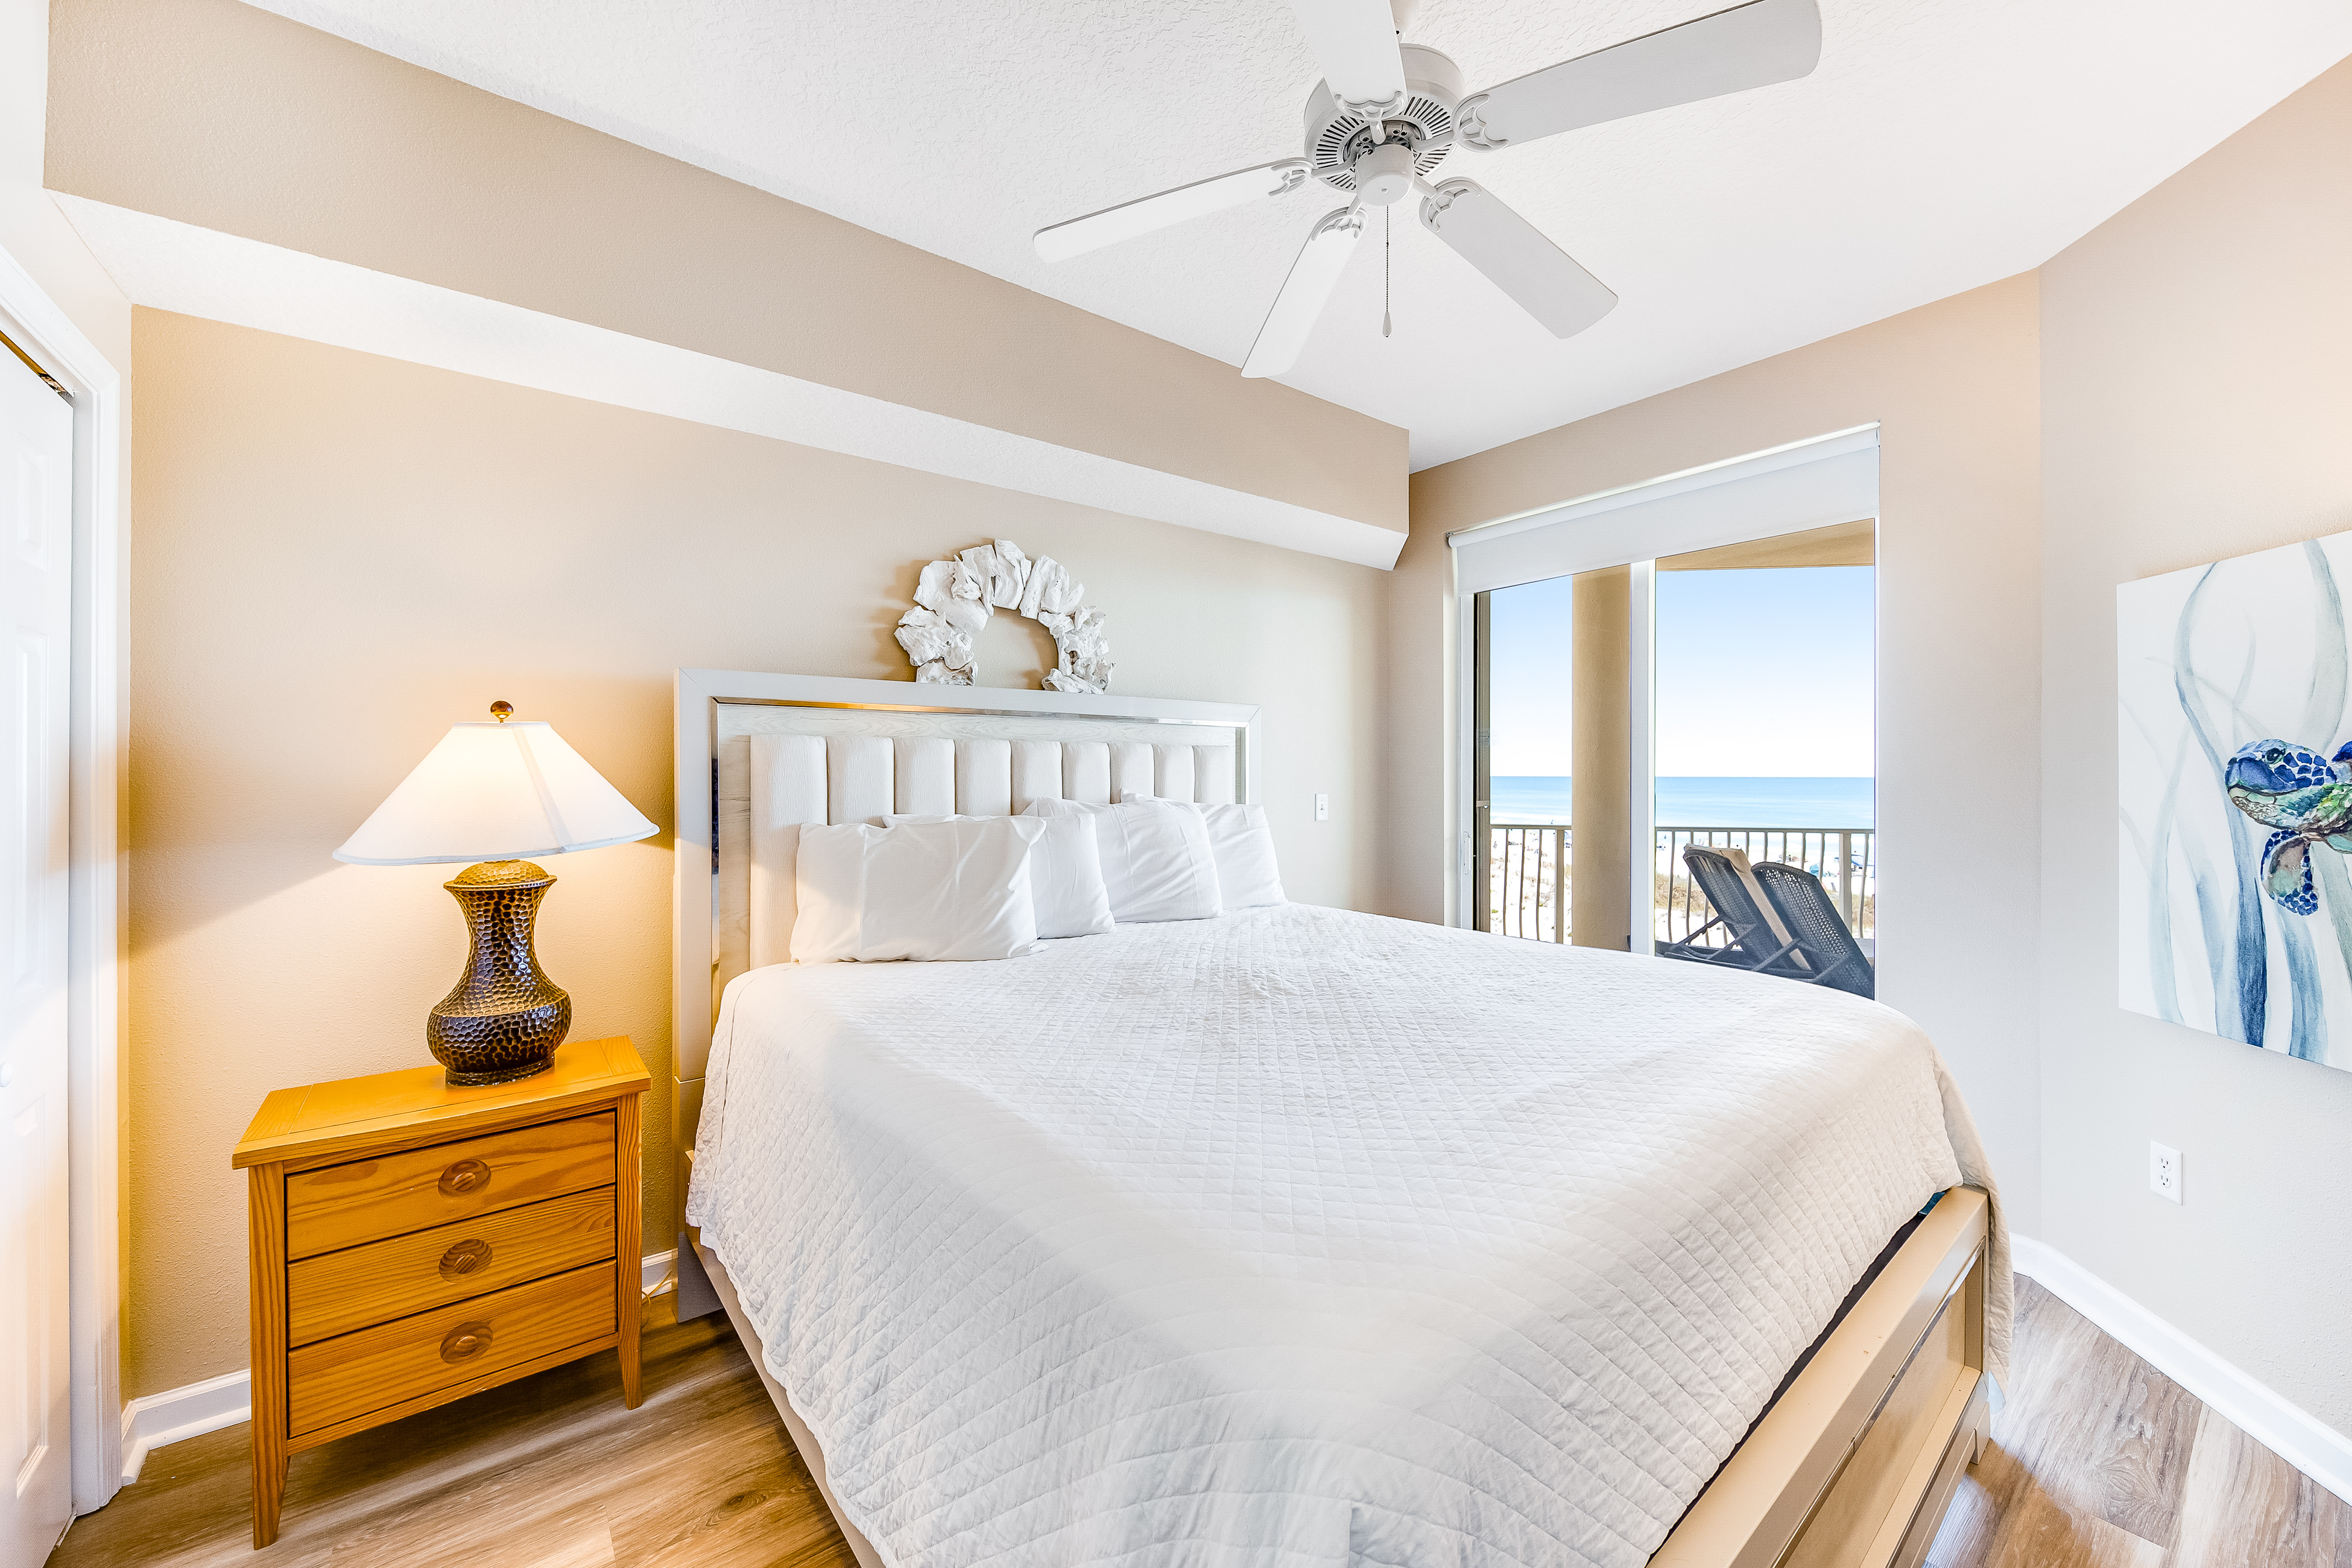 Dunes of Seagrove A210 Condo rental in Dunes of Seagrove in Highway 30-A Florida - #20